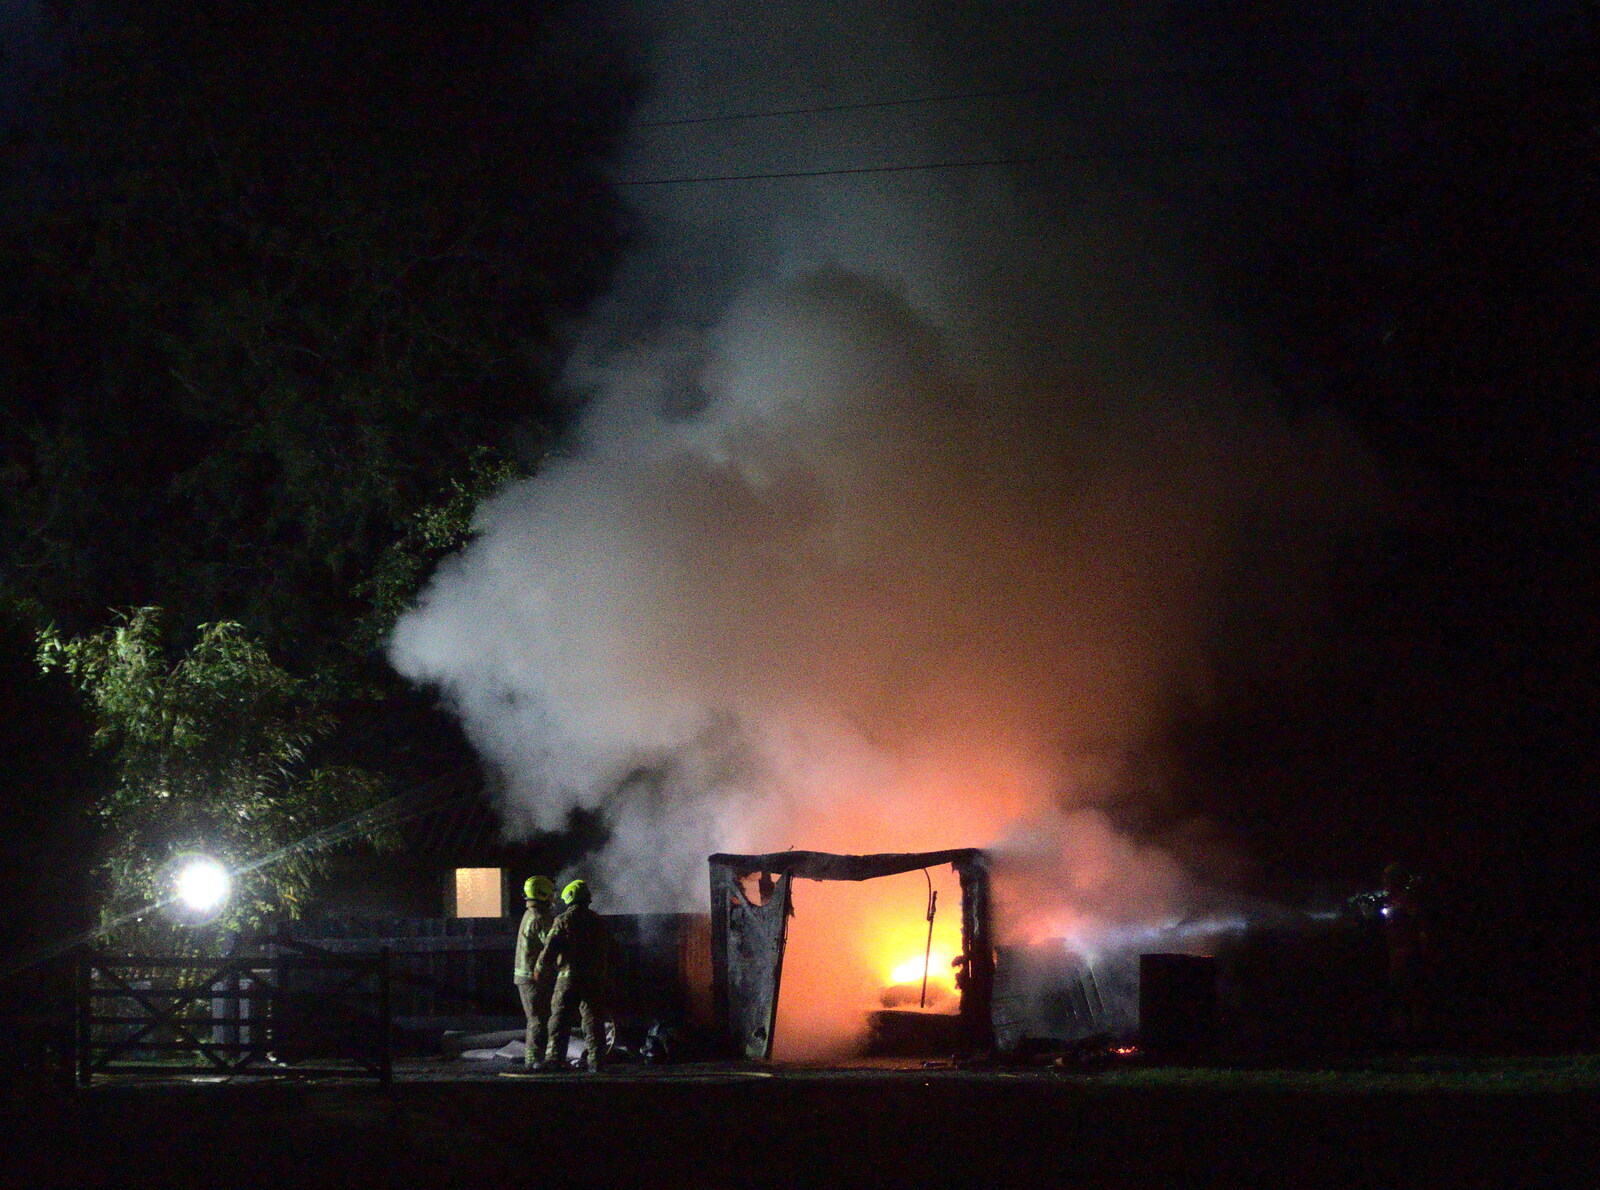 The firefighters get the shed fire under control from A Fire, a Fête, and a Scout Camp, Hallowtree, Suffolk - 30th June 2022